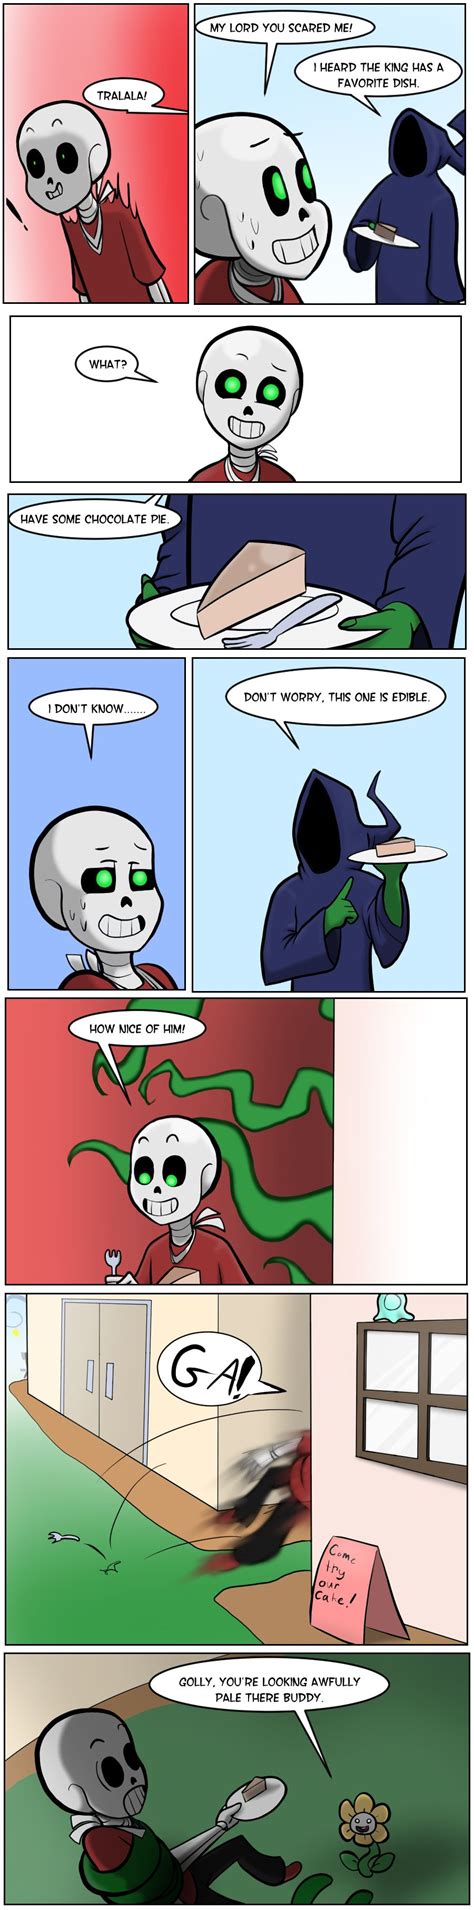 Undertale Green Chapter 3 Page 17 By Flamingreapercomic Undertale